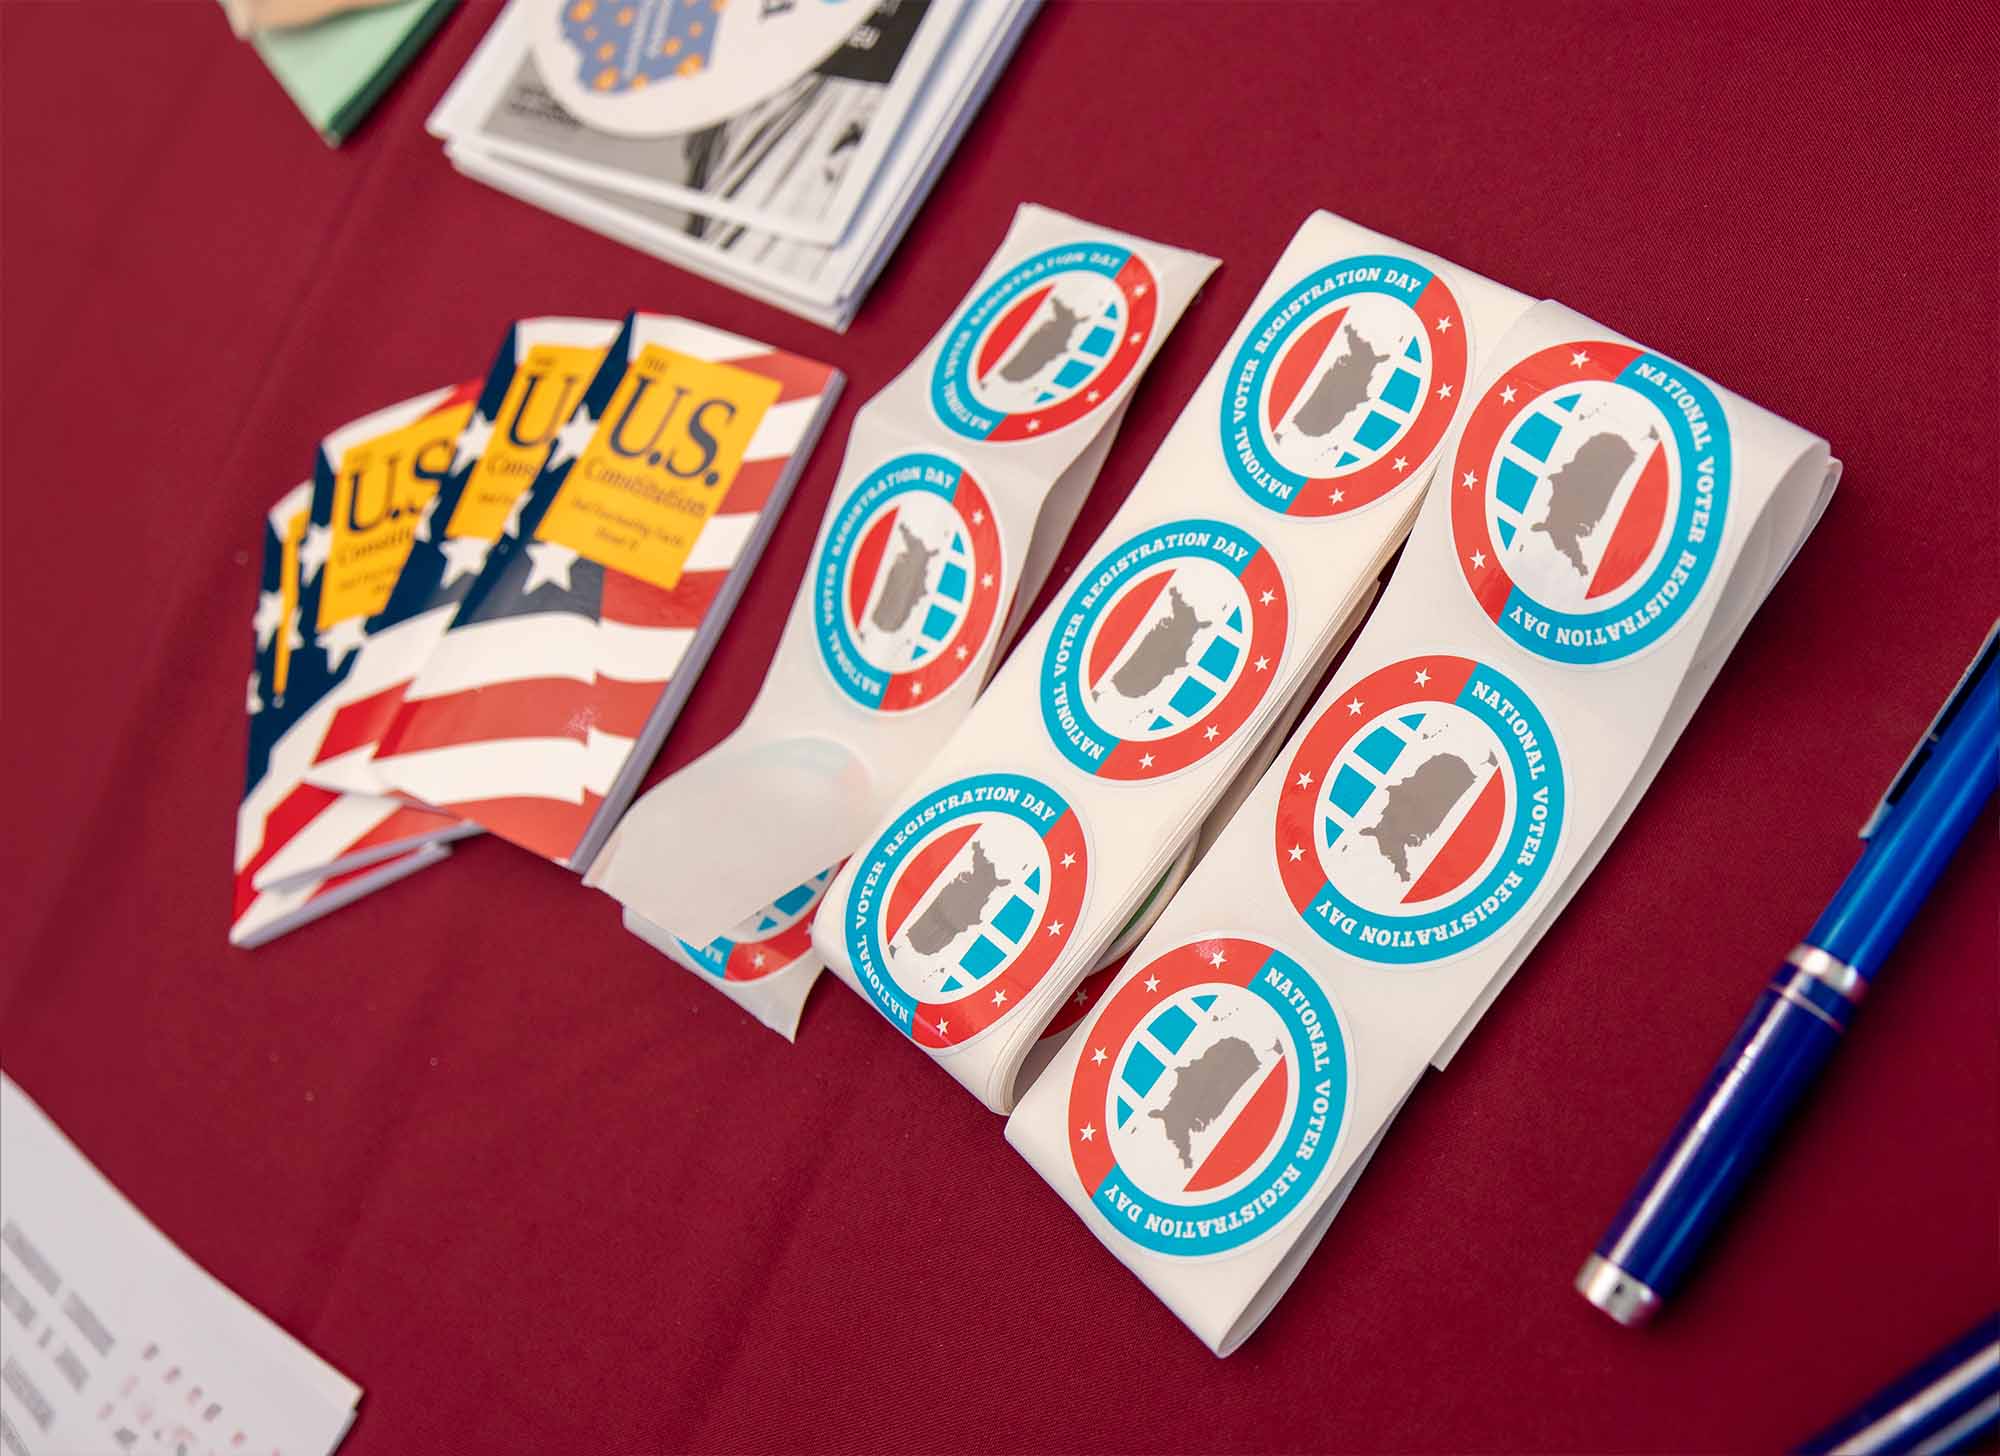 Various elections pamphlets, stickers, papers, and pens on a table